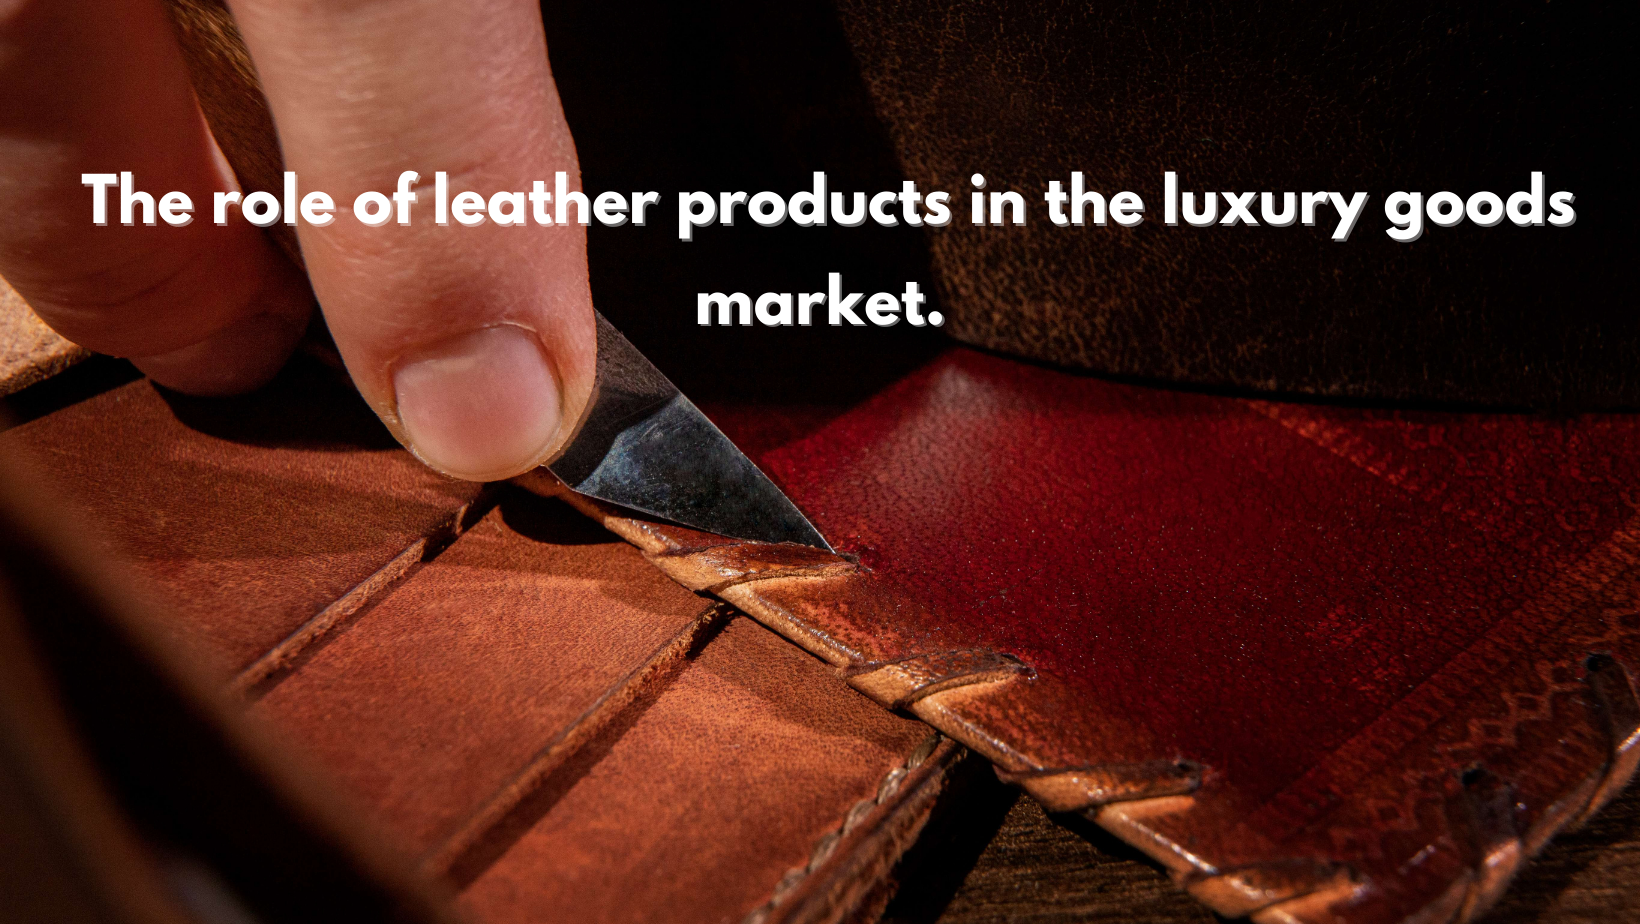 The role of leather products in the luxury goods market.